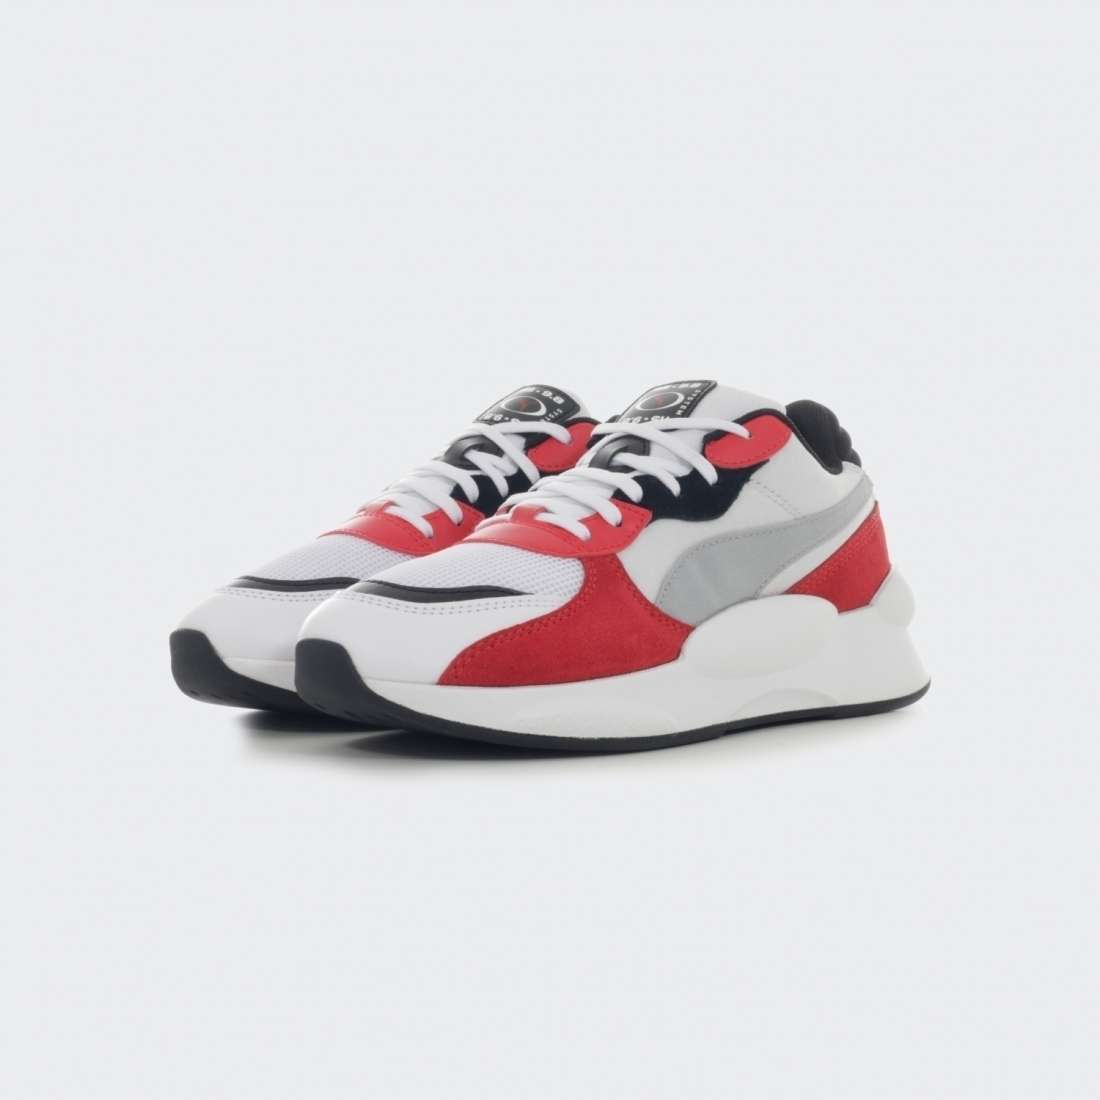 PUMA RS 9.8 SPACE WHITE/RED